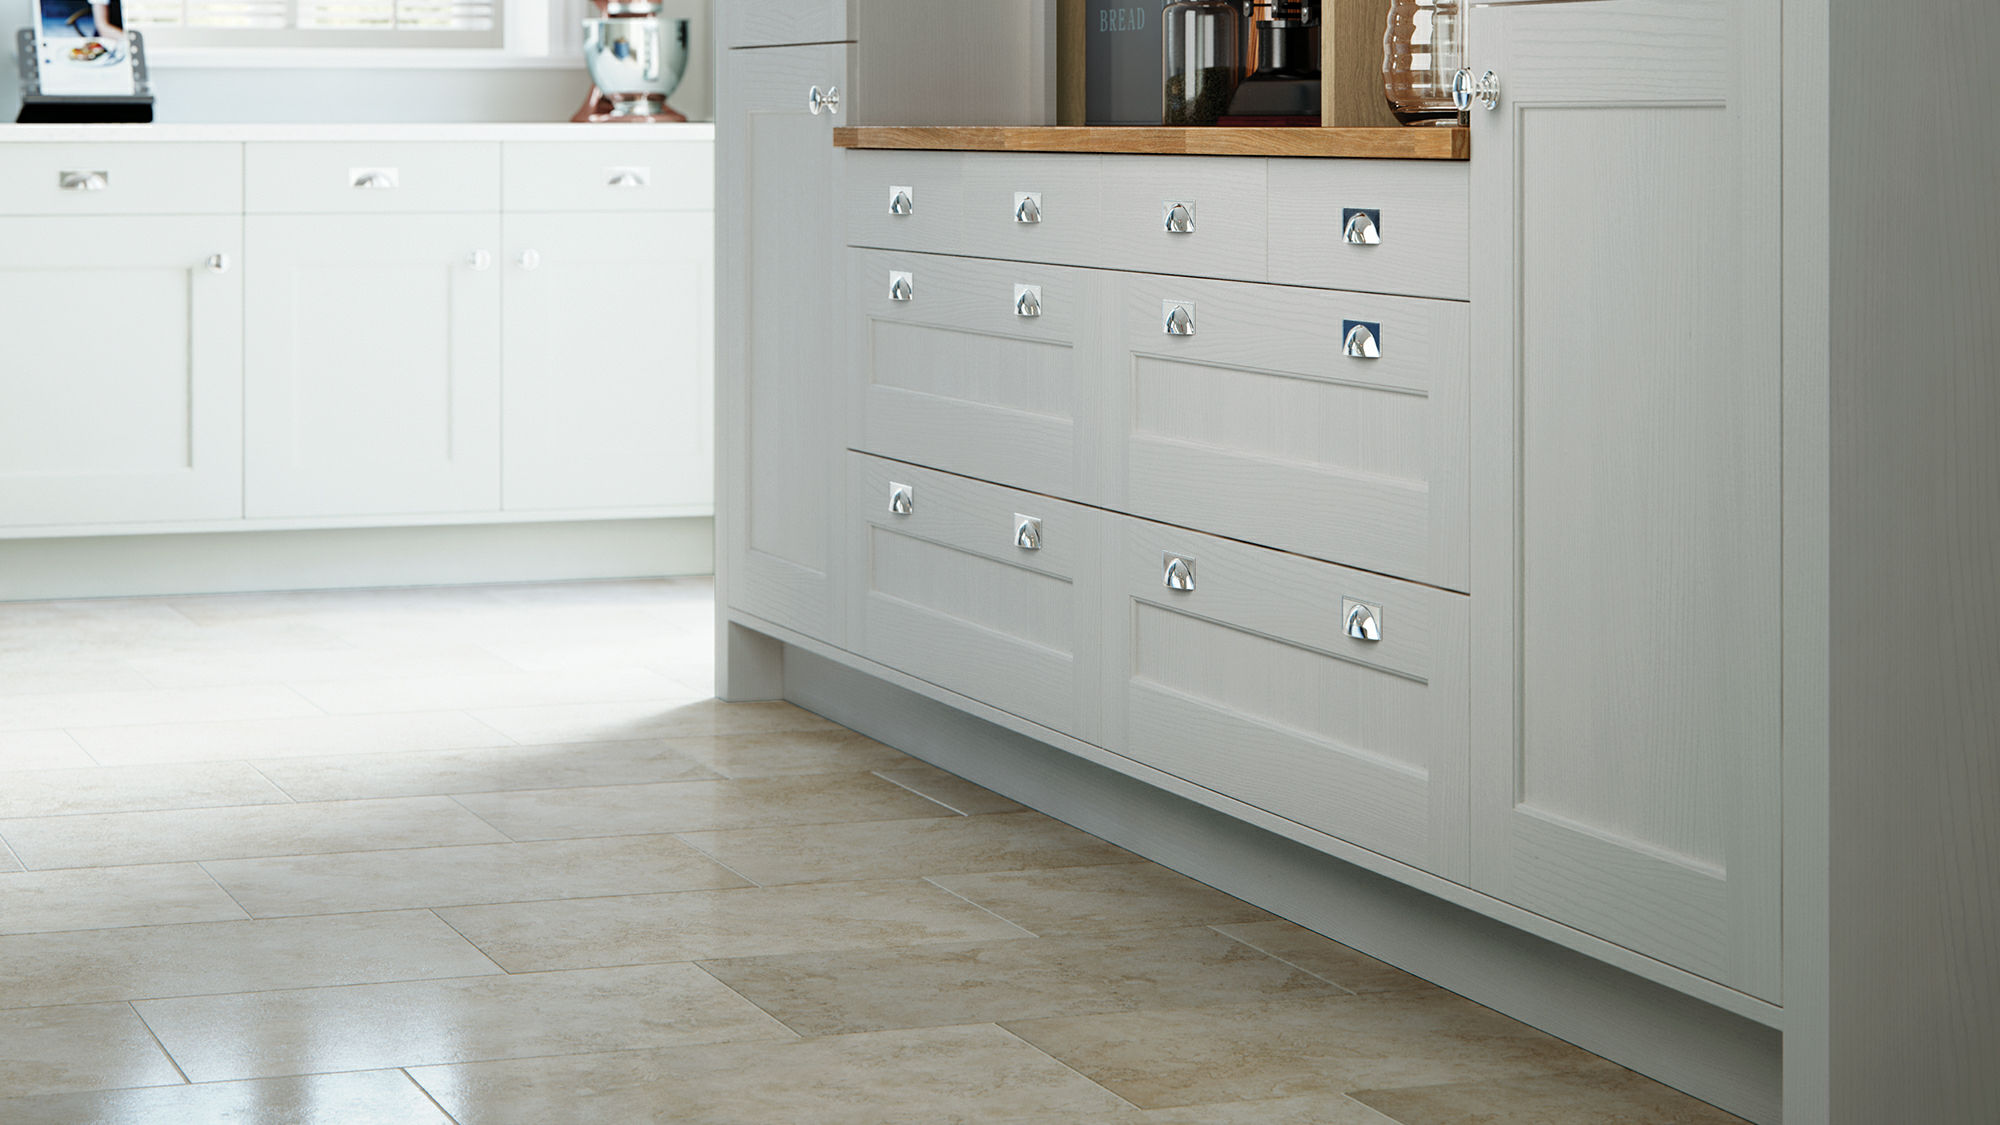 Wakefield solid wood mussel kitchens highlighting traditional craftsmanship in a subtle, serene hue